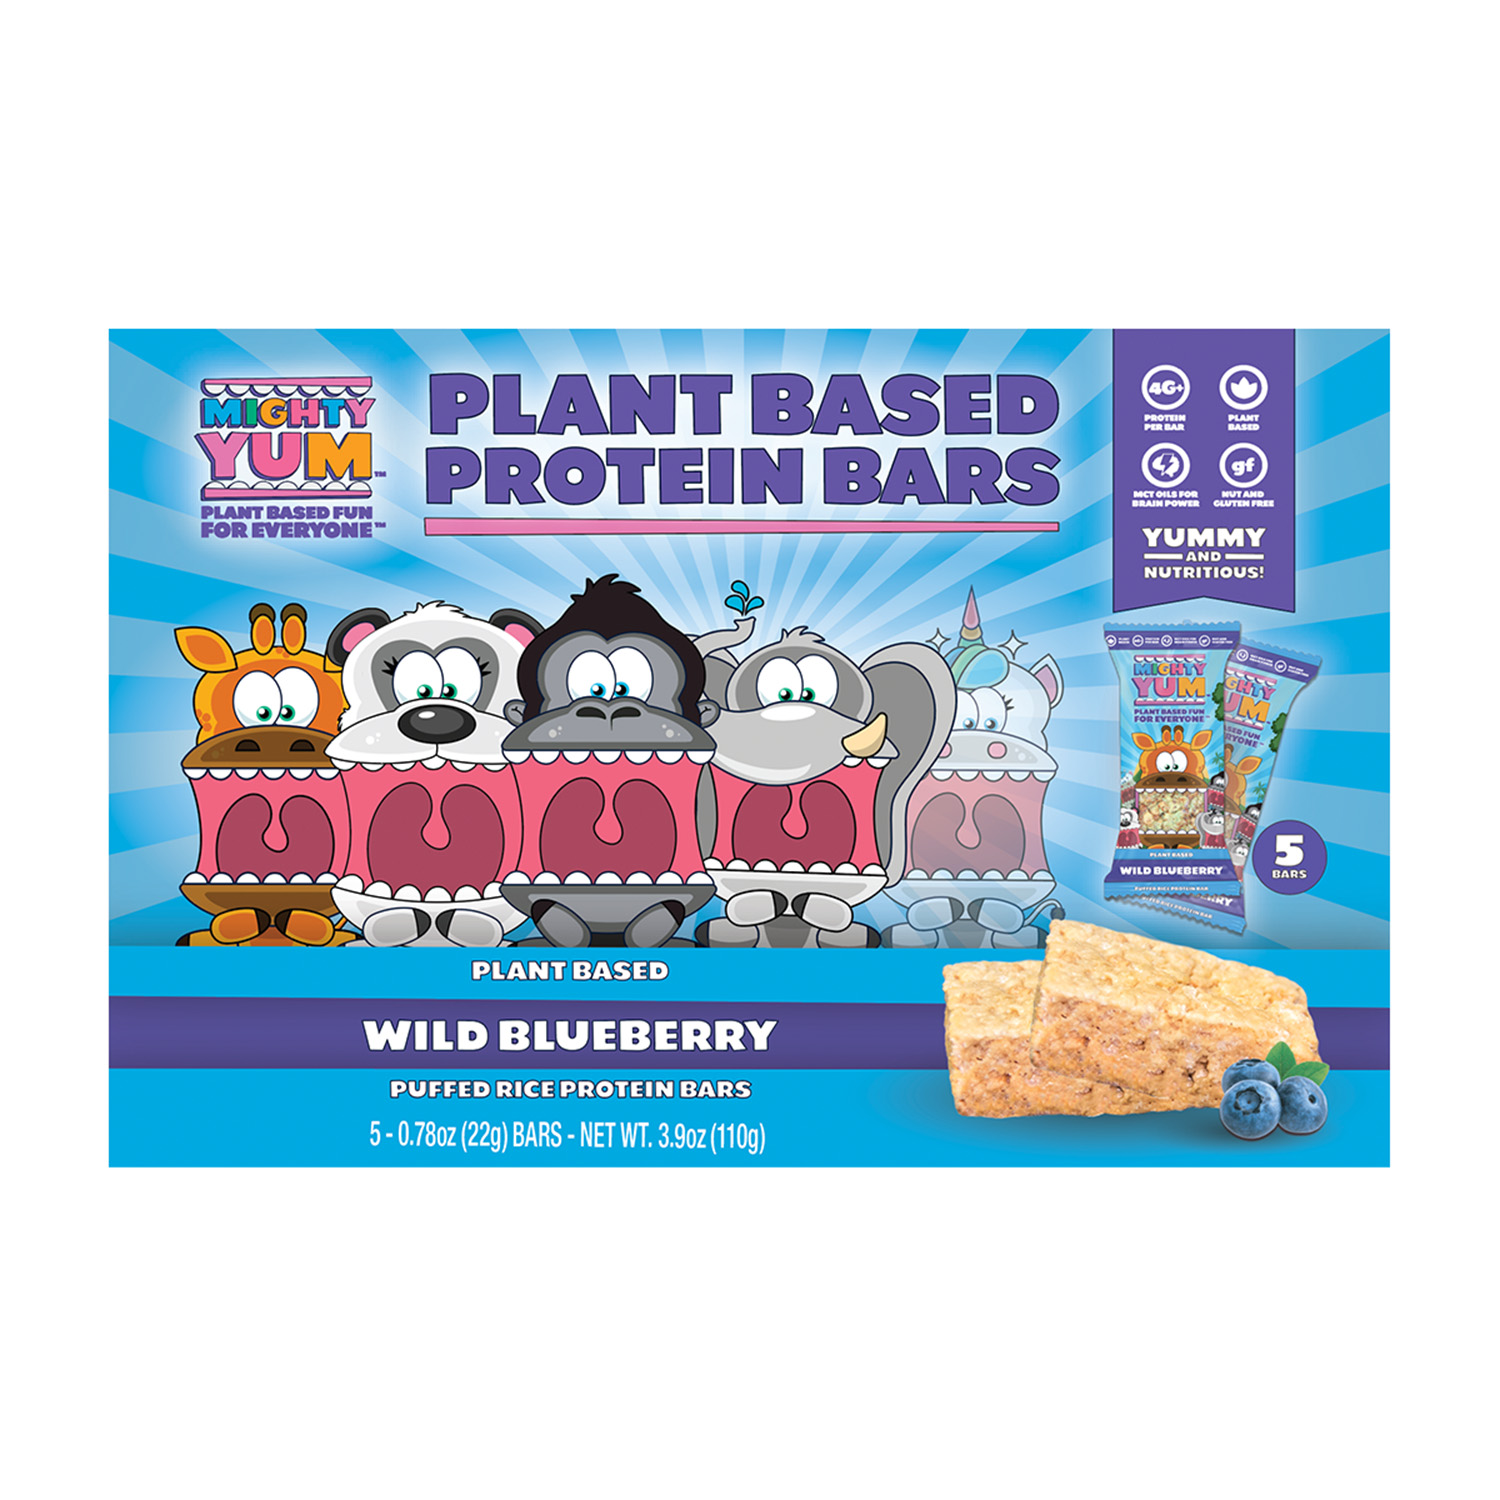 Mighty Yum Sales Box of 5 Units - Plant-Based Wild Blueberry Protein Bar 24 units per case 5.0 oz